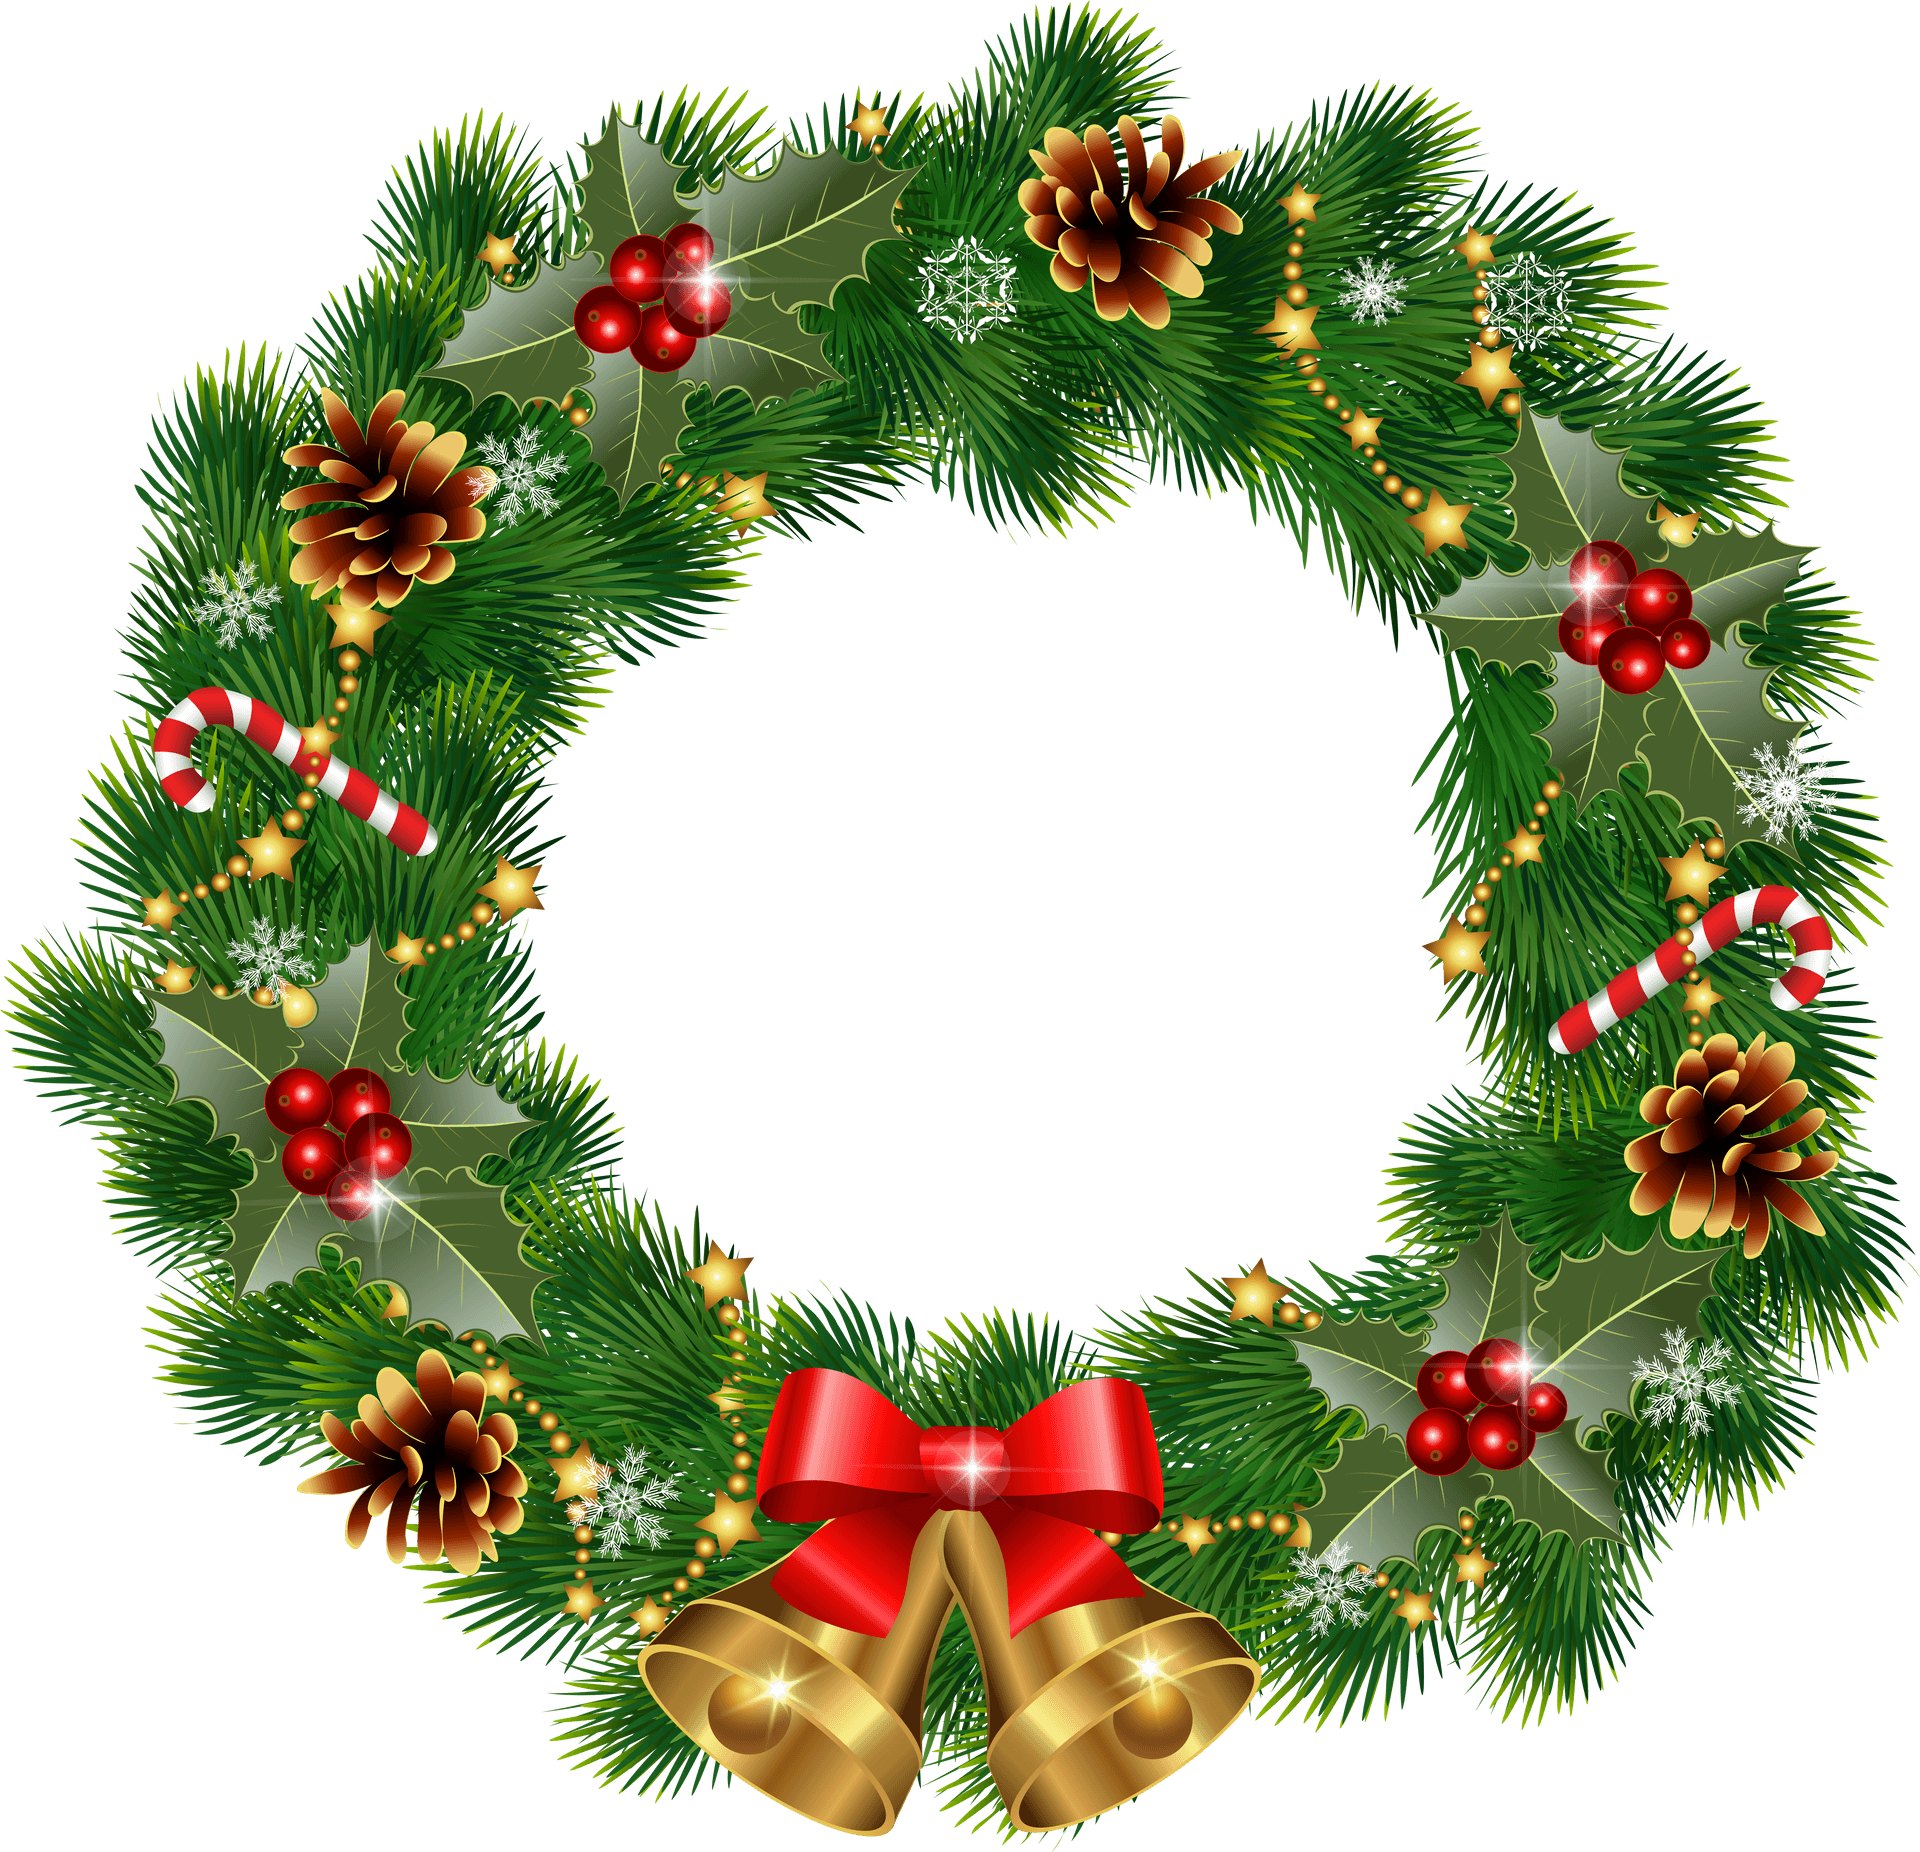 Download Festive Christmas Wreath.png | Wallpapers.com